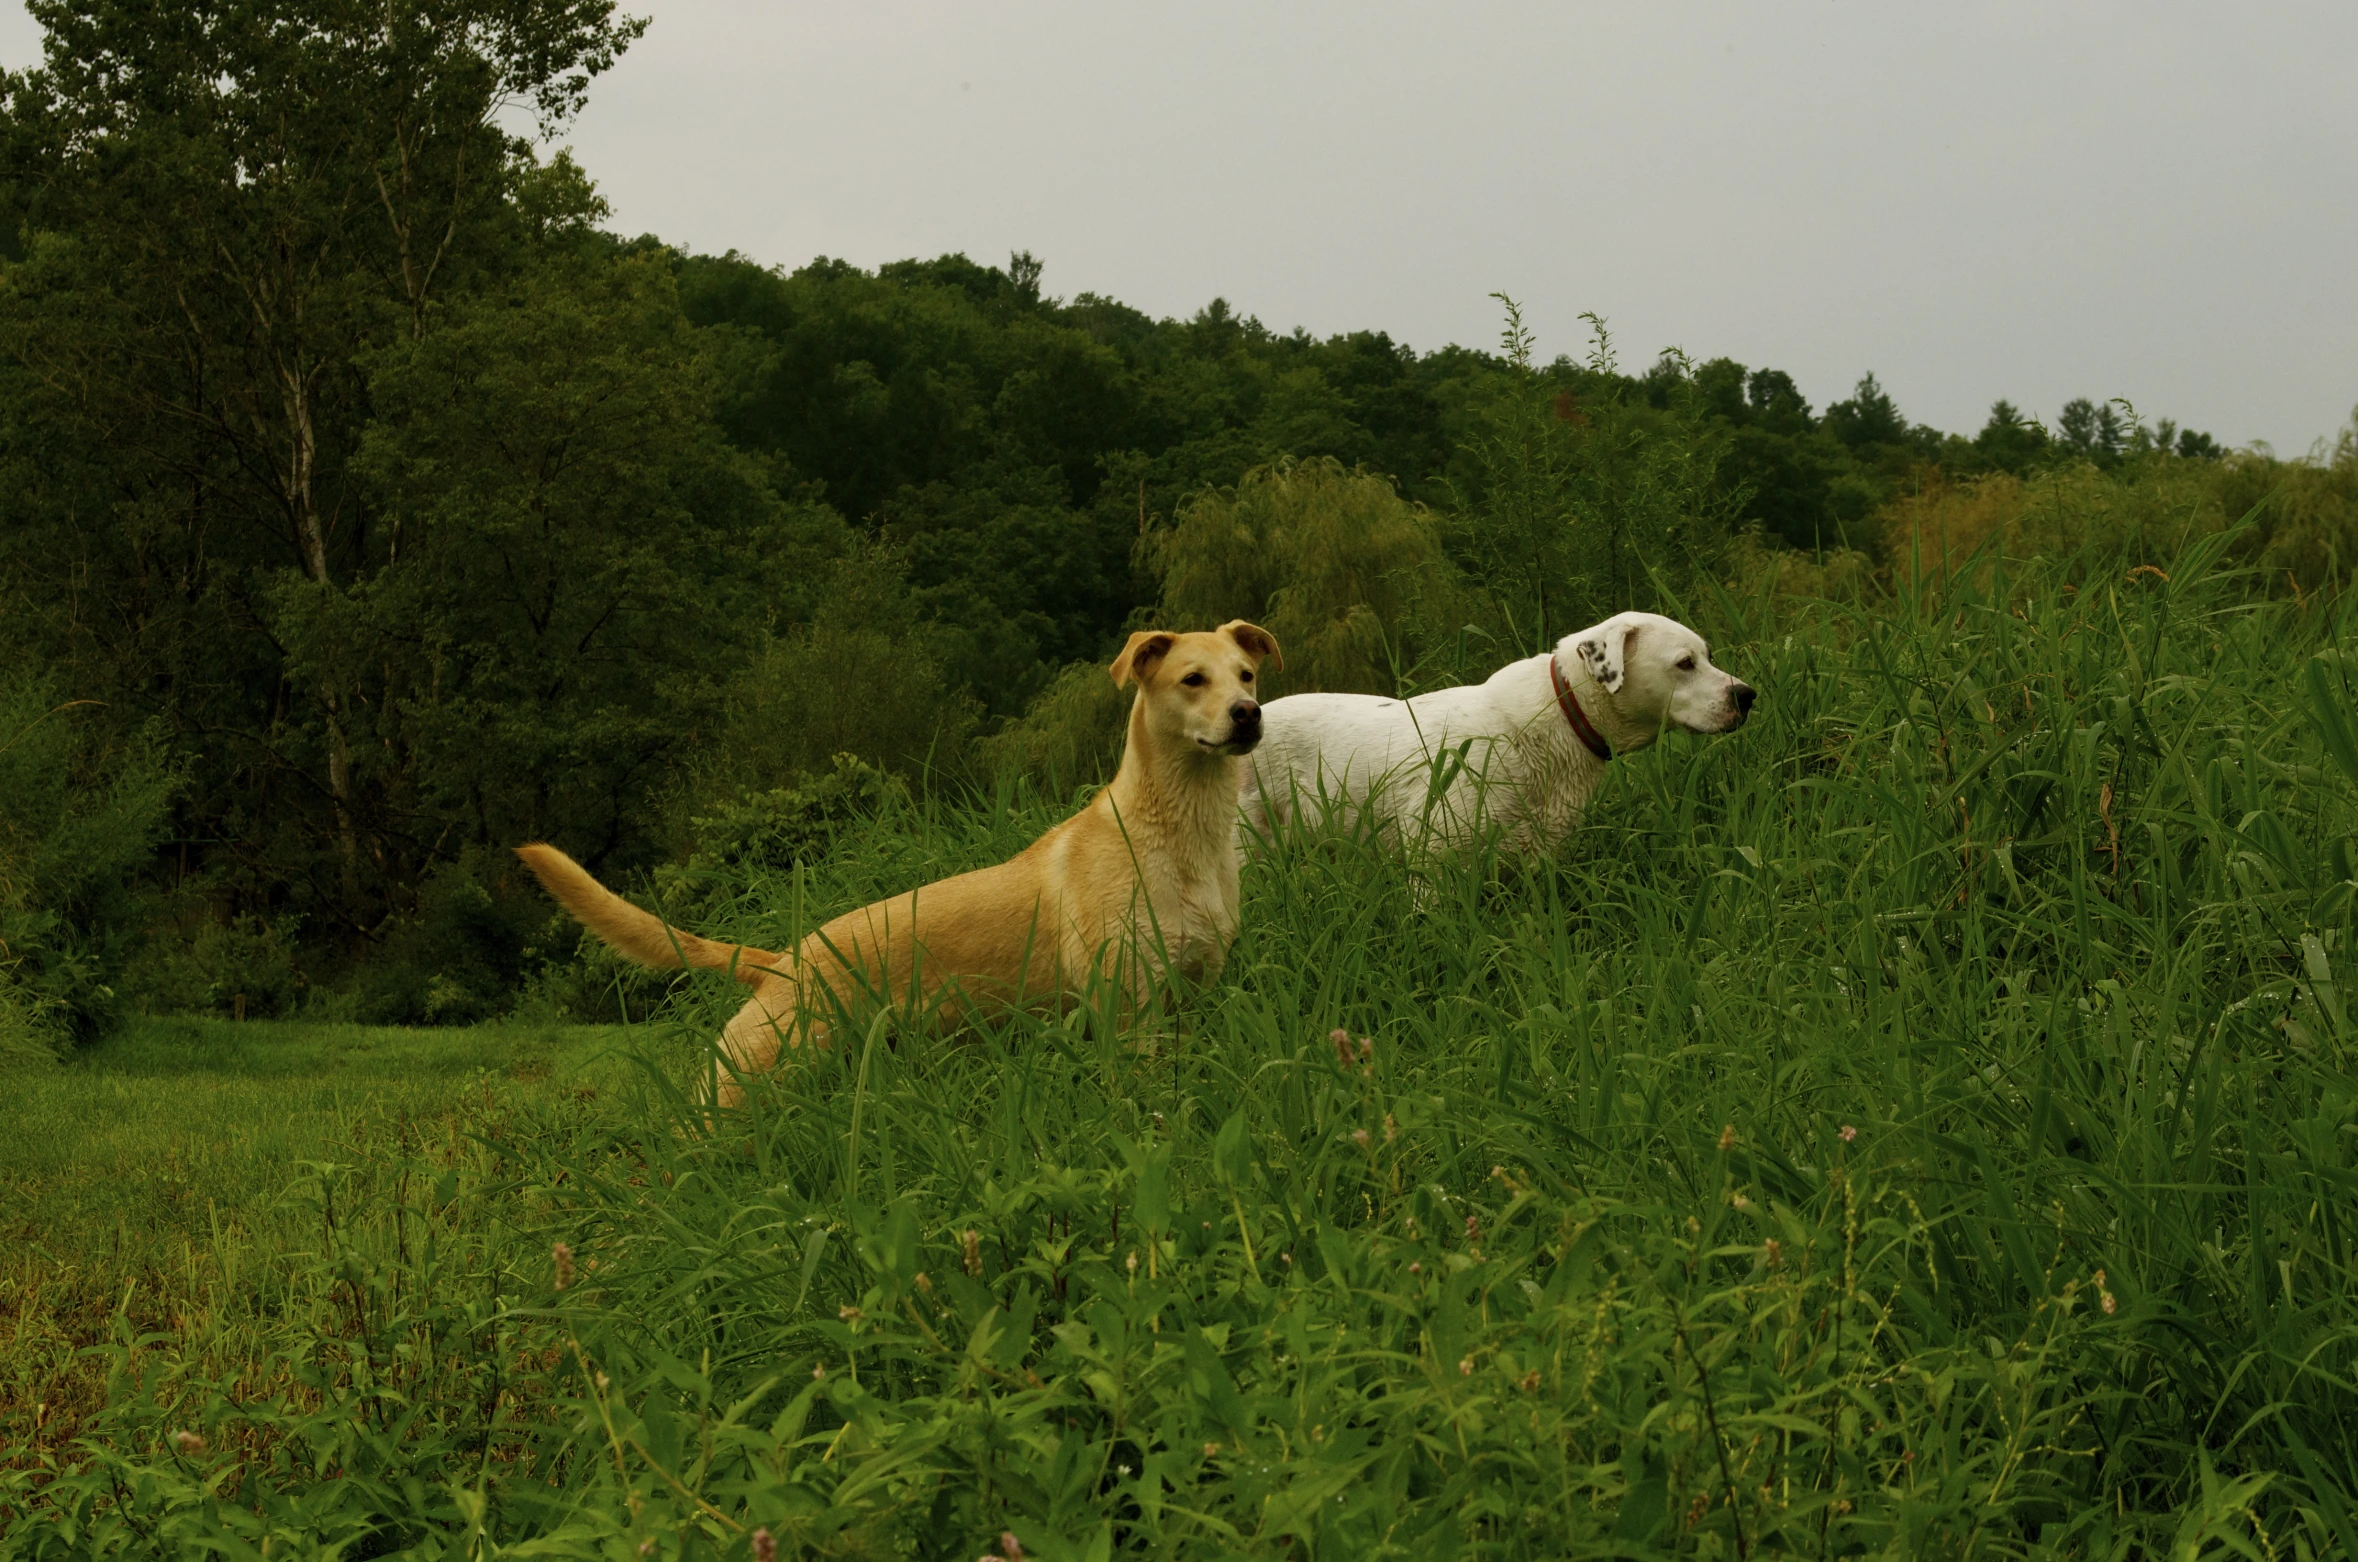 two white and yellow labs in grassy area next to trees